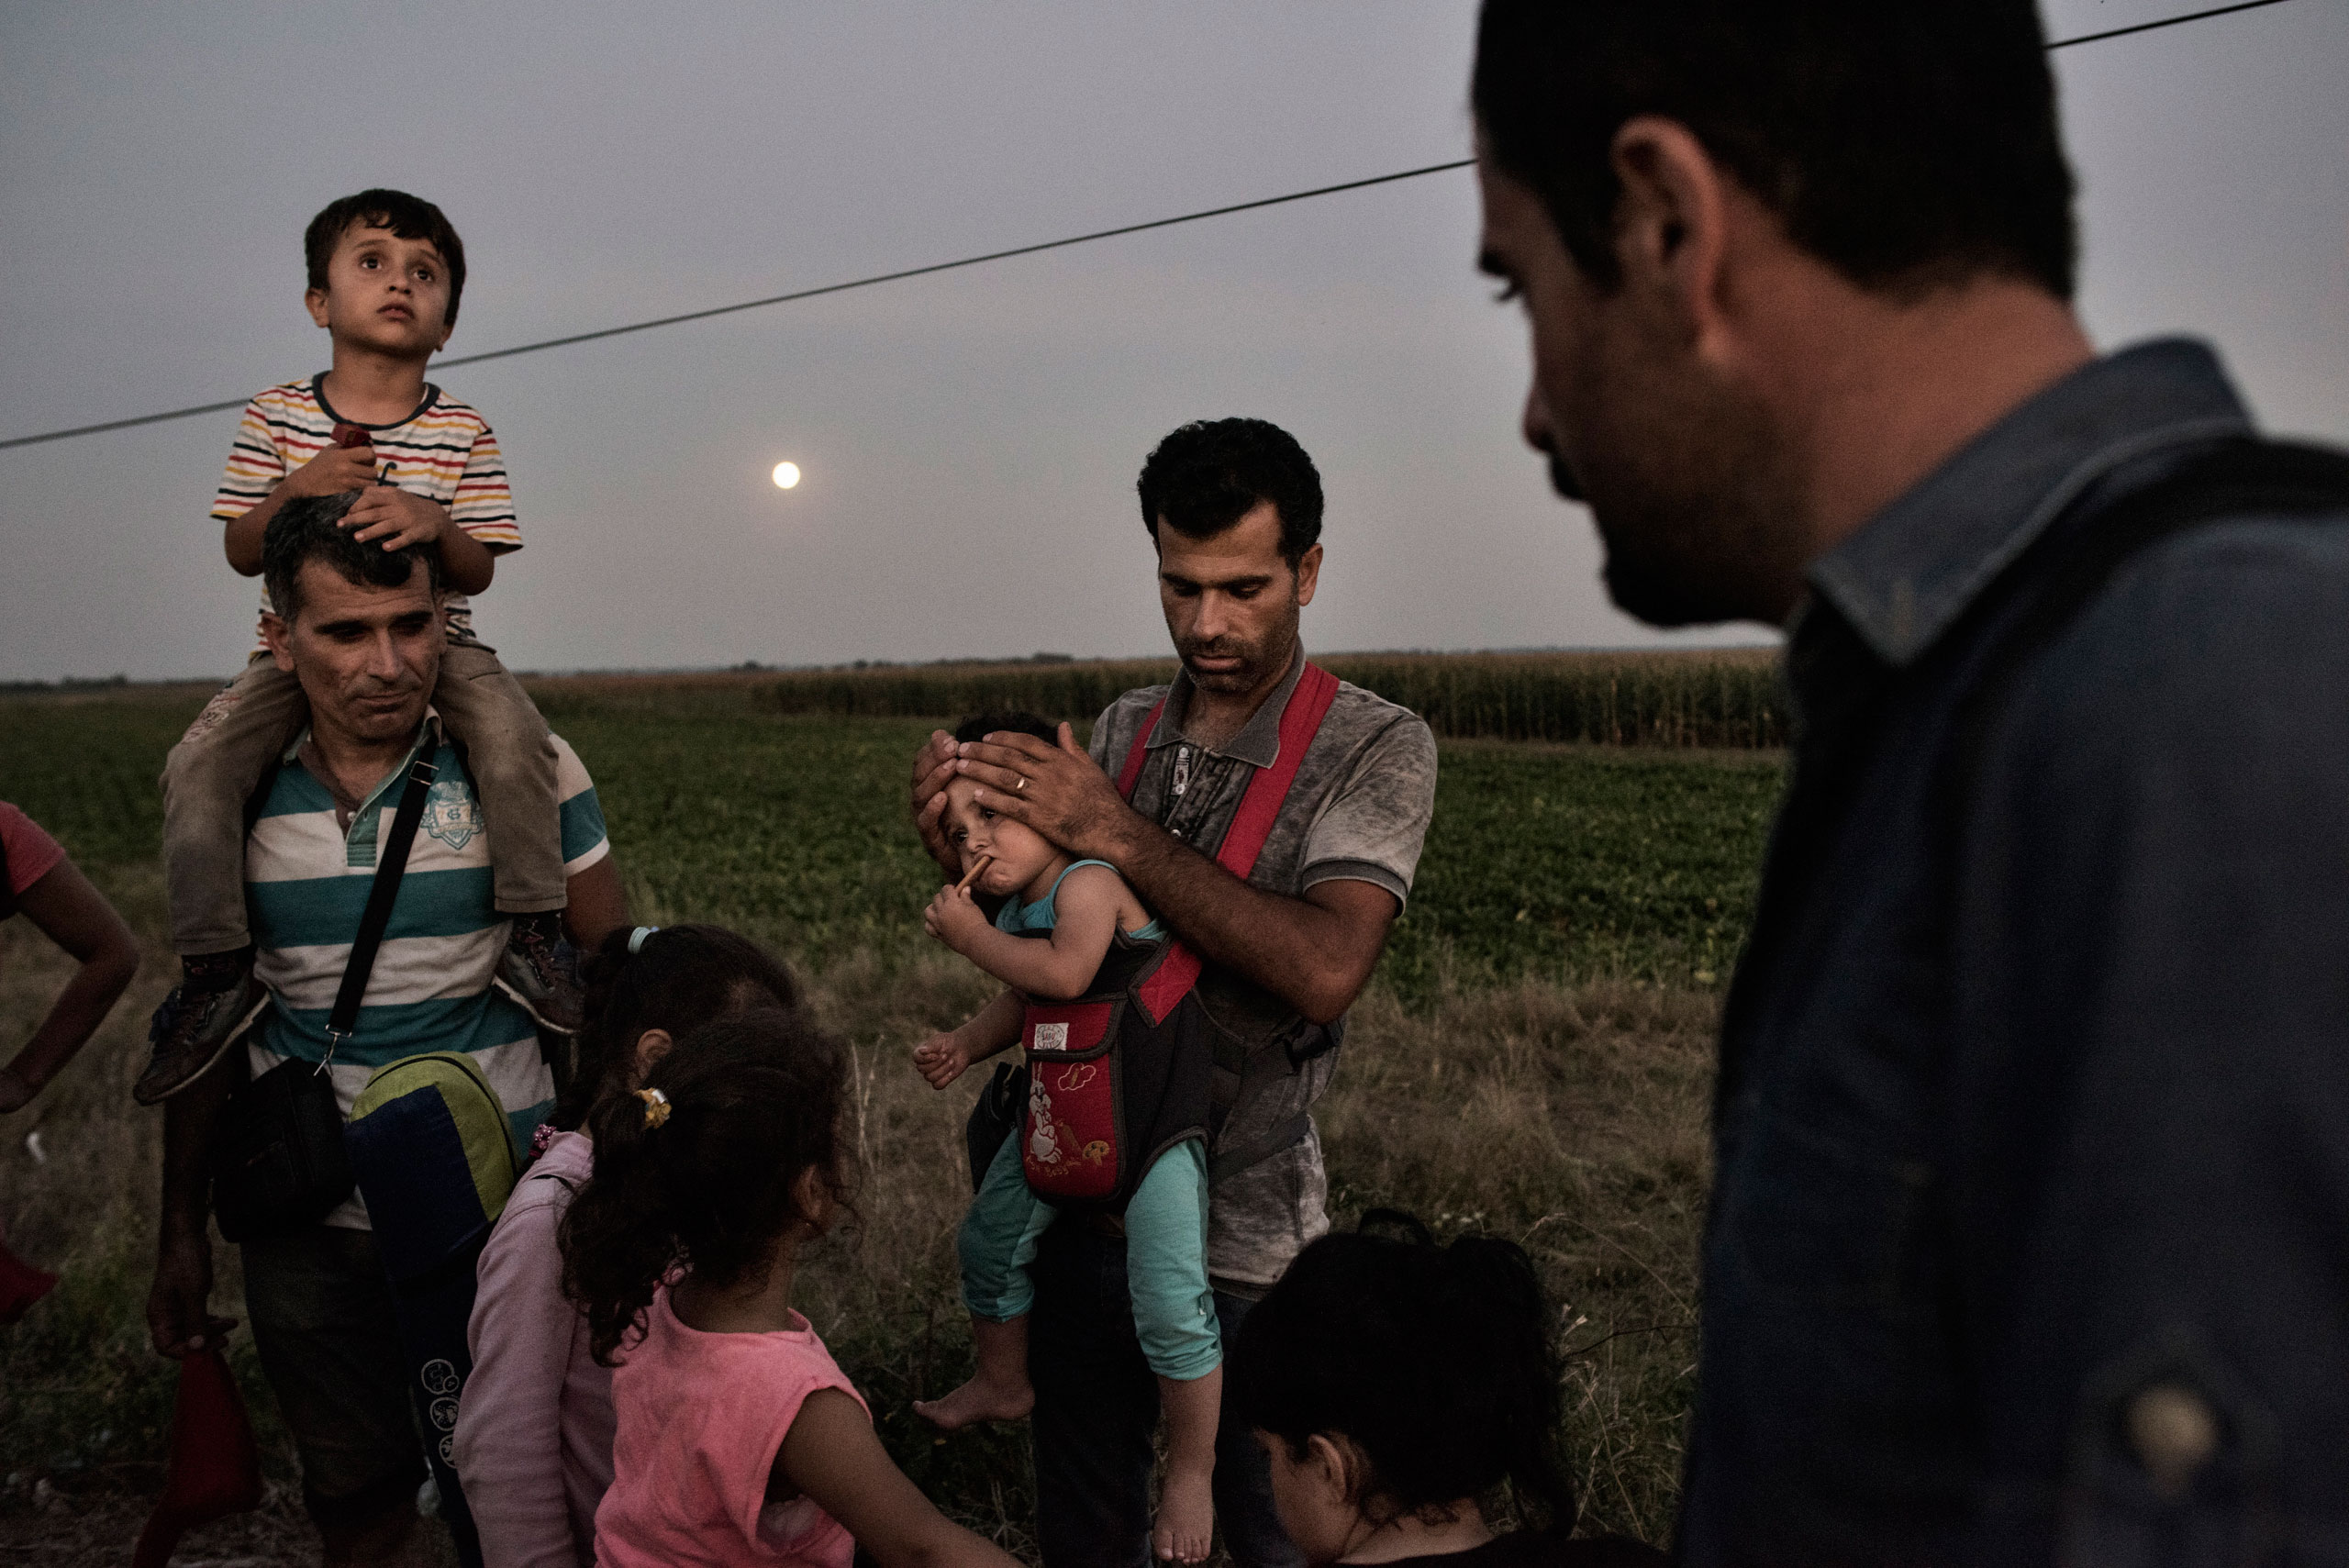 A Syrian family prepares to turn themselves into a Hungarian detention facility for migrants arriving in the European Union in Roszke, Hungary on Aug. 29, 2015. (Yuri Kozyrev—NOOR for TIME)